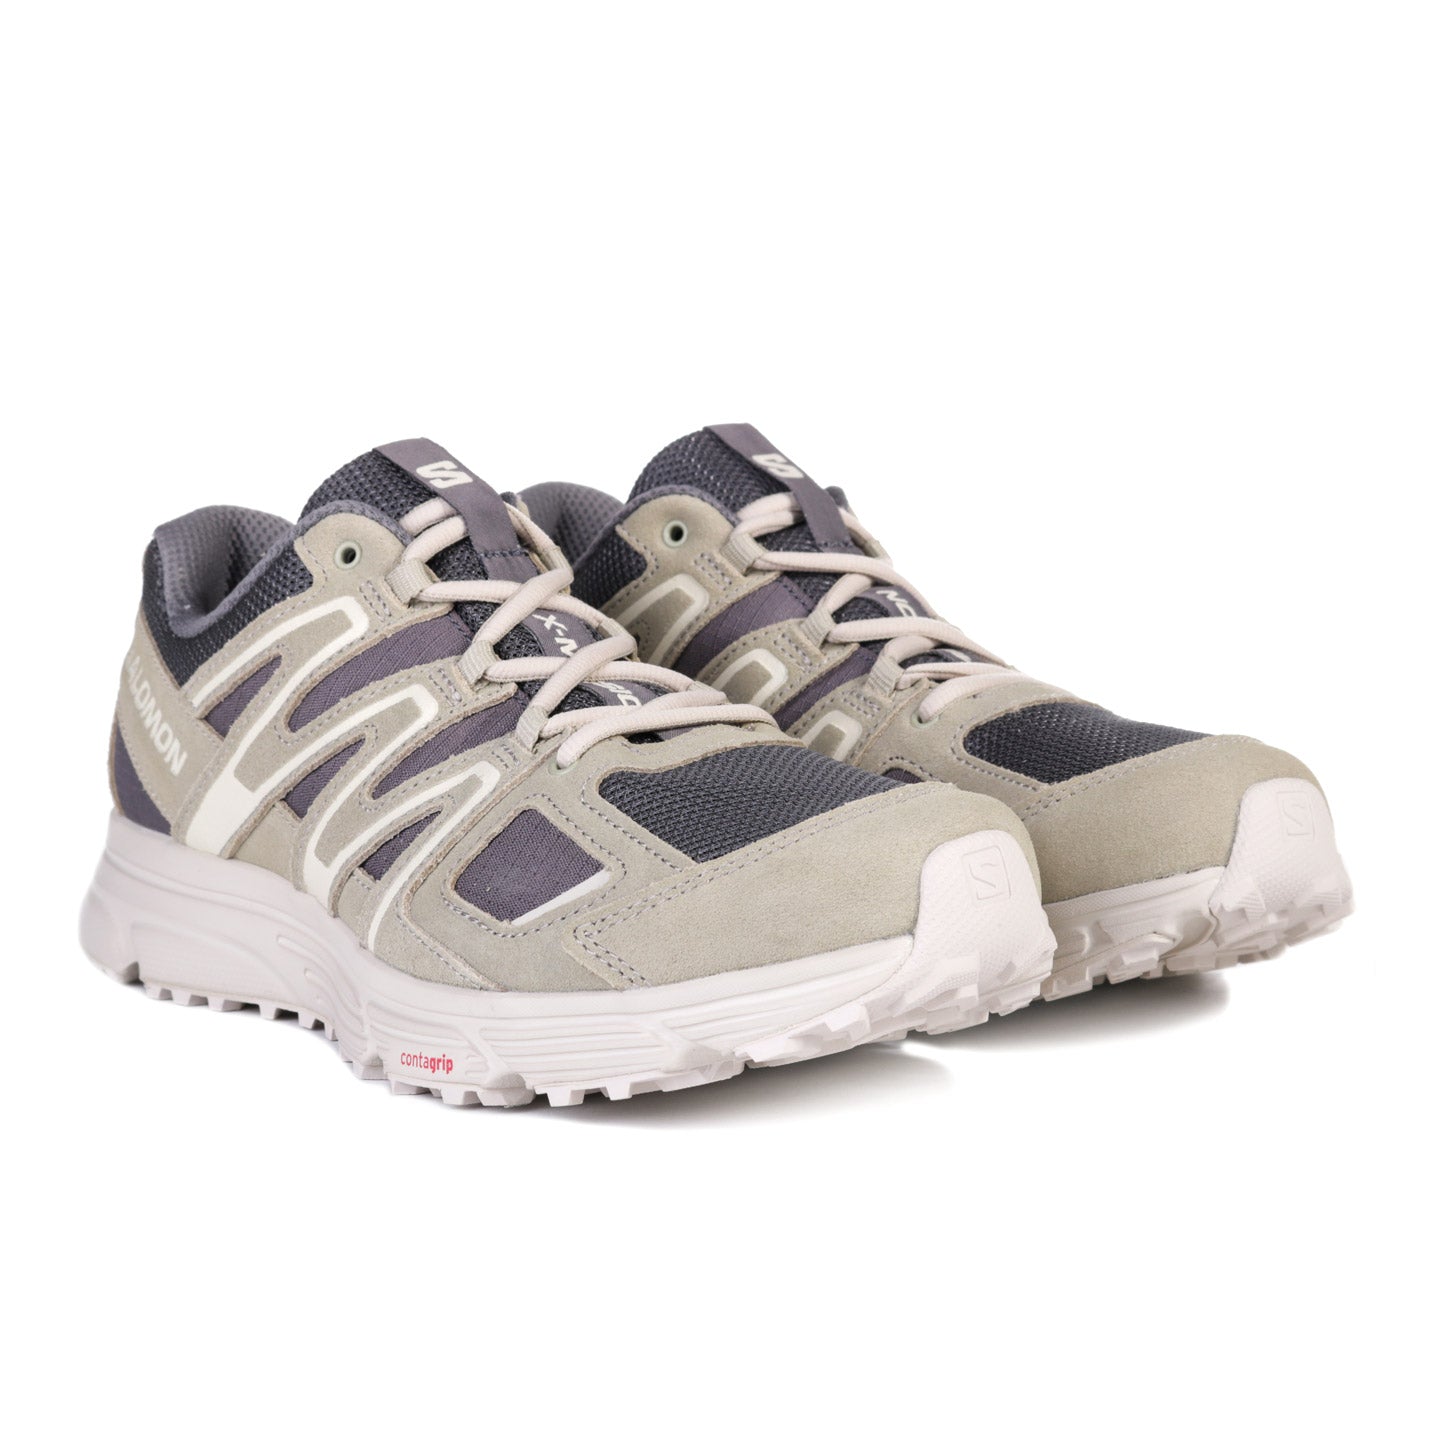 SALOMON X-MISSION 4 SUEDE PEWTER / MOSS GRAY